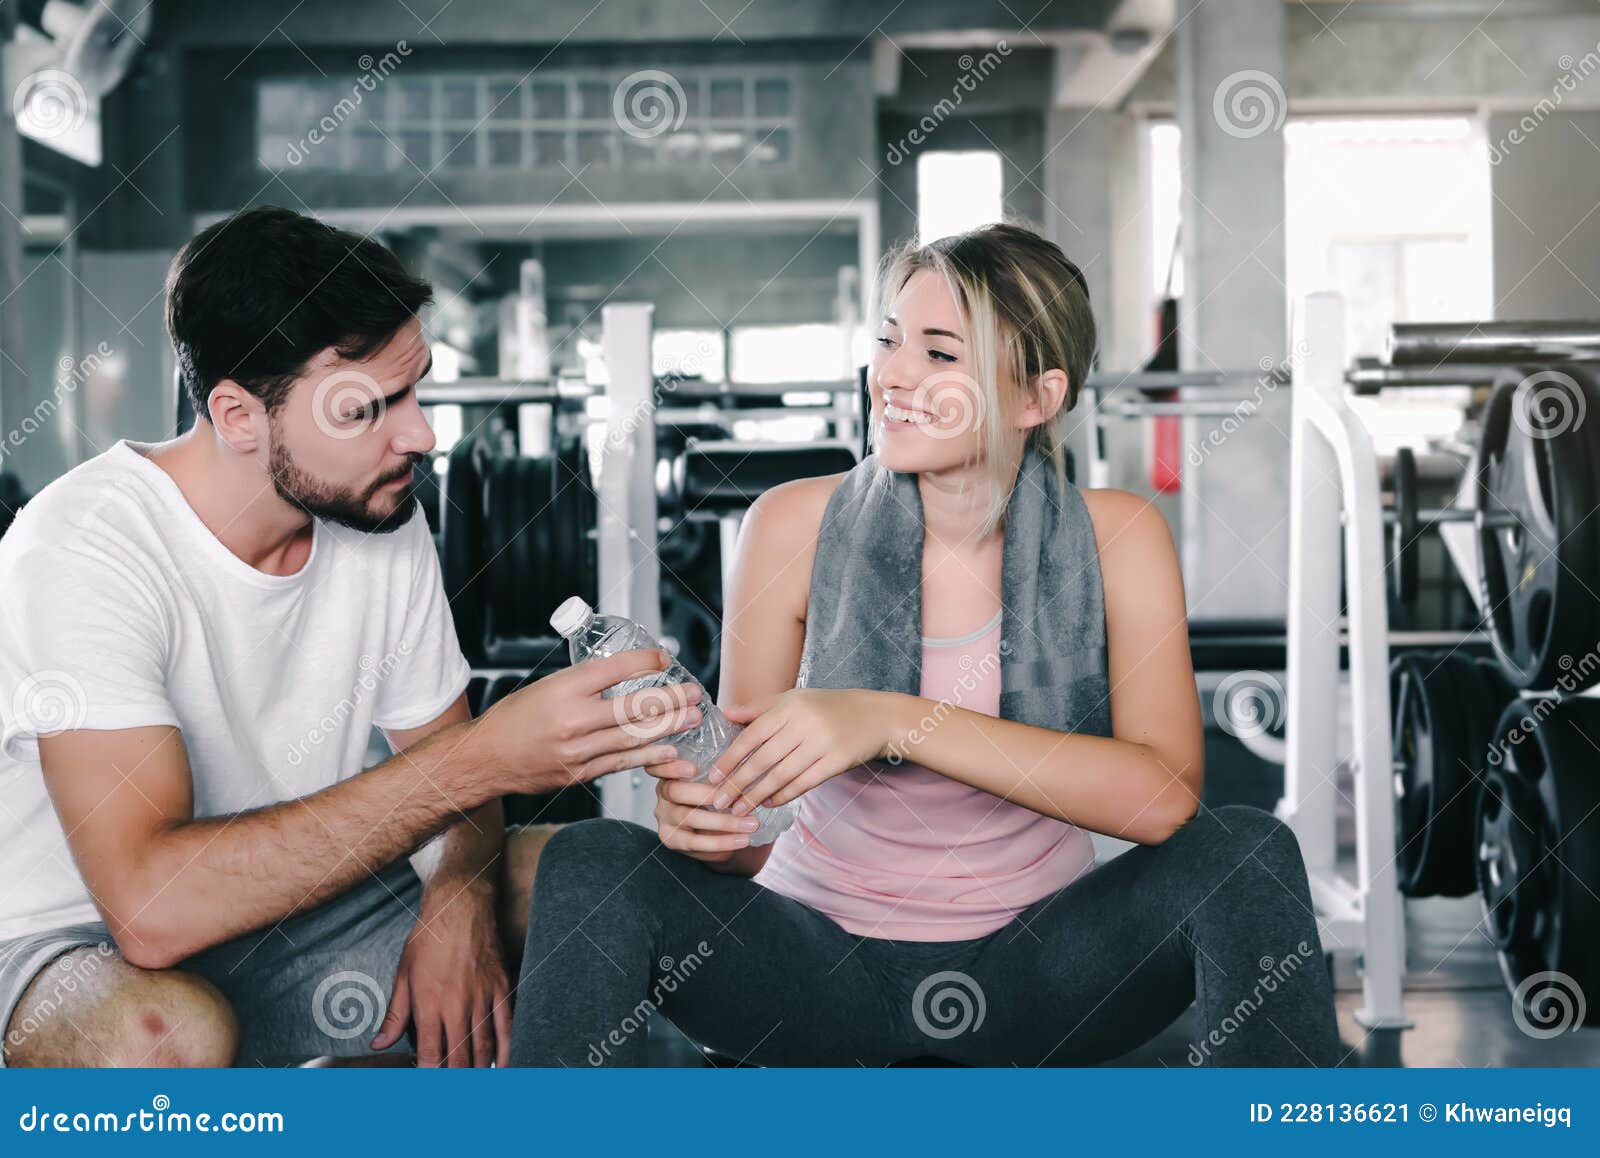 Sport Couple Love Sharing A Bottle Of Water Together After Exercised In